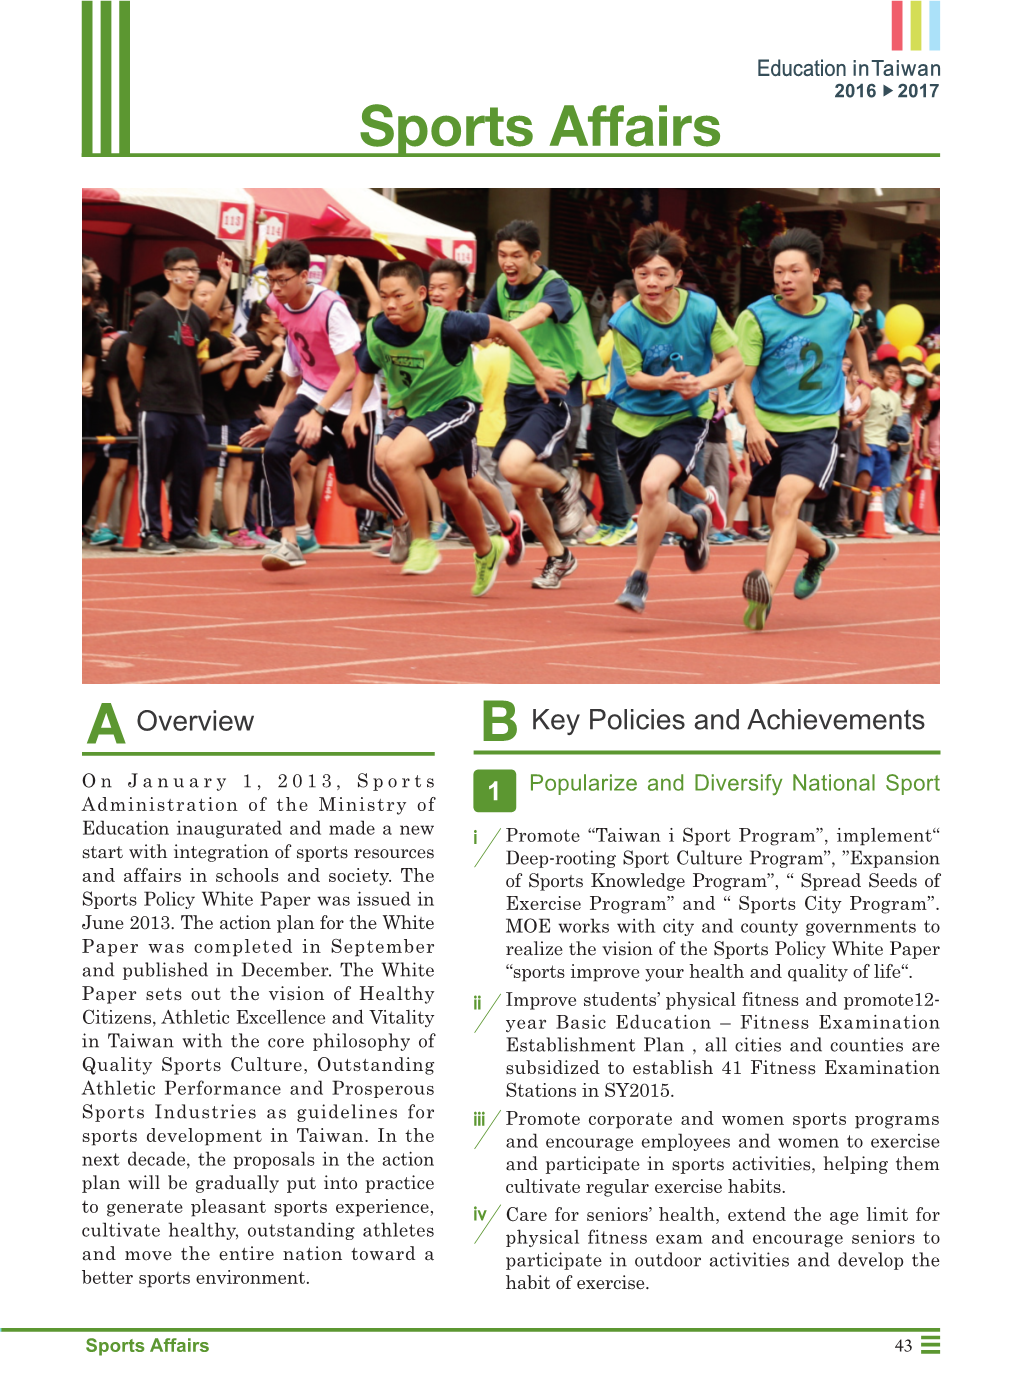 Sports Affairs for the Golden Decades, the Key Goals in the Special Education Policies Include